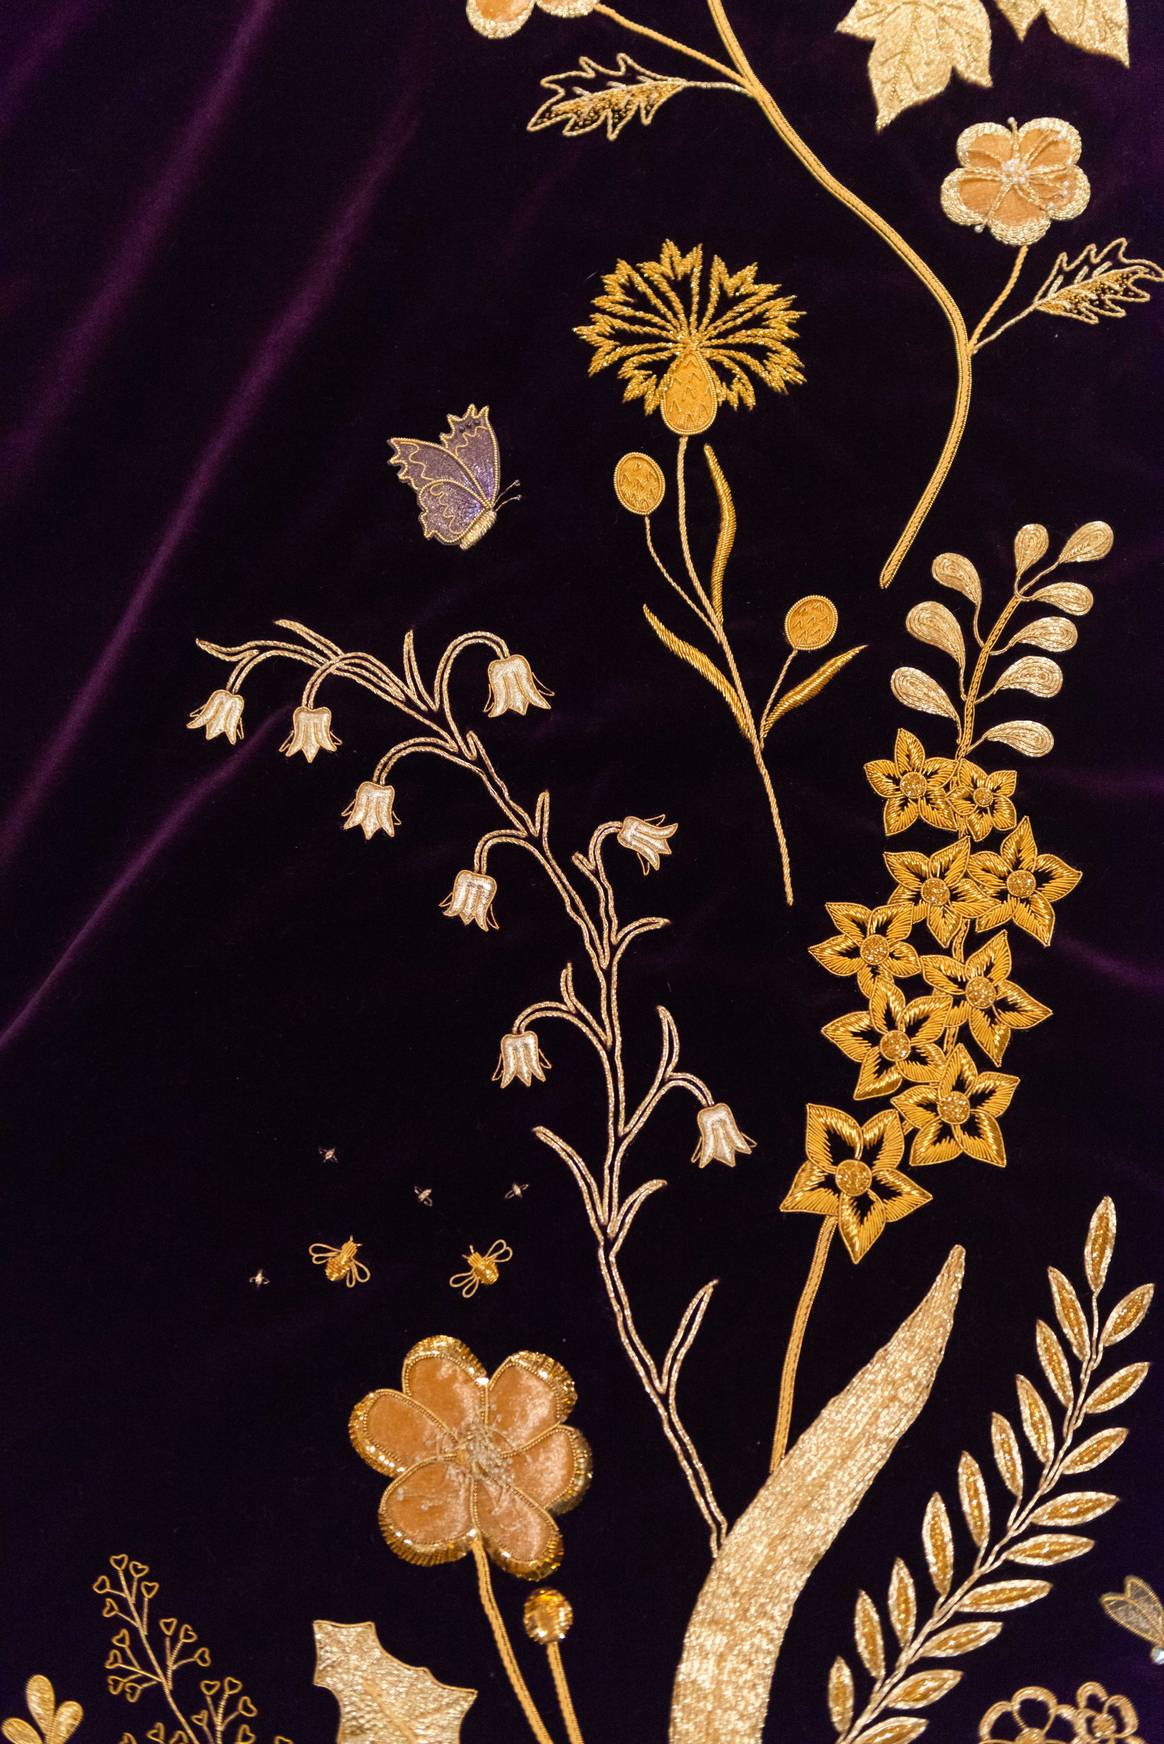 A close-up of the embroidered details on The Queen’s Robe of Estate, showing a butterfly and bees